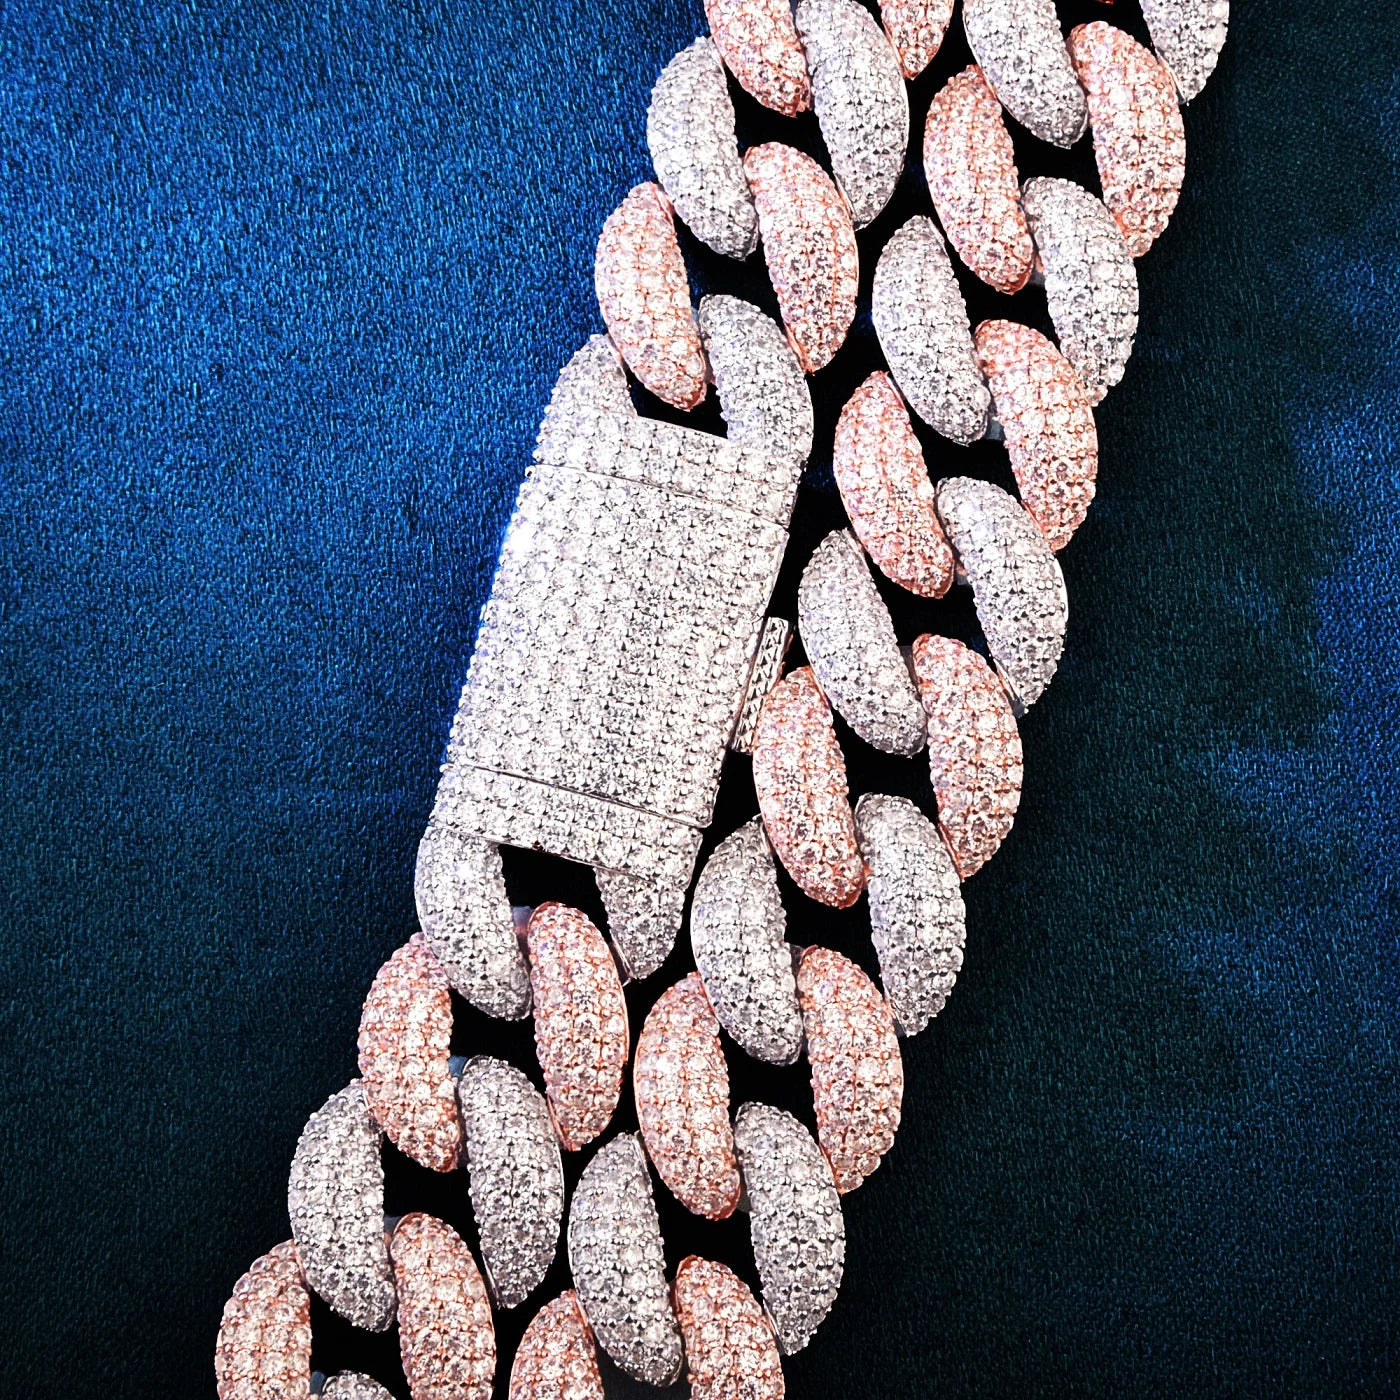 Two-Tone Rose Gold Miami Cuban Link Chain Necklace - 19mm